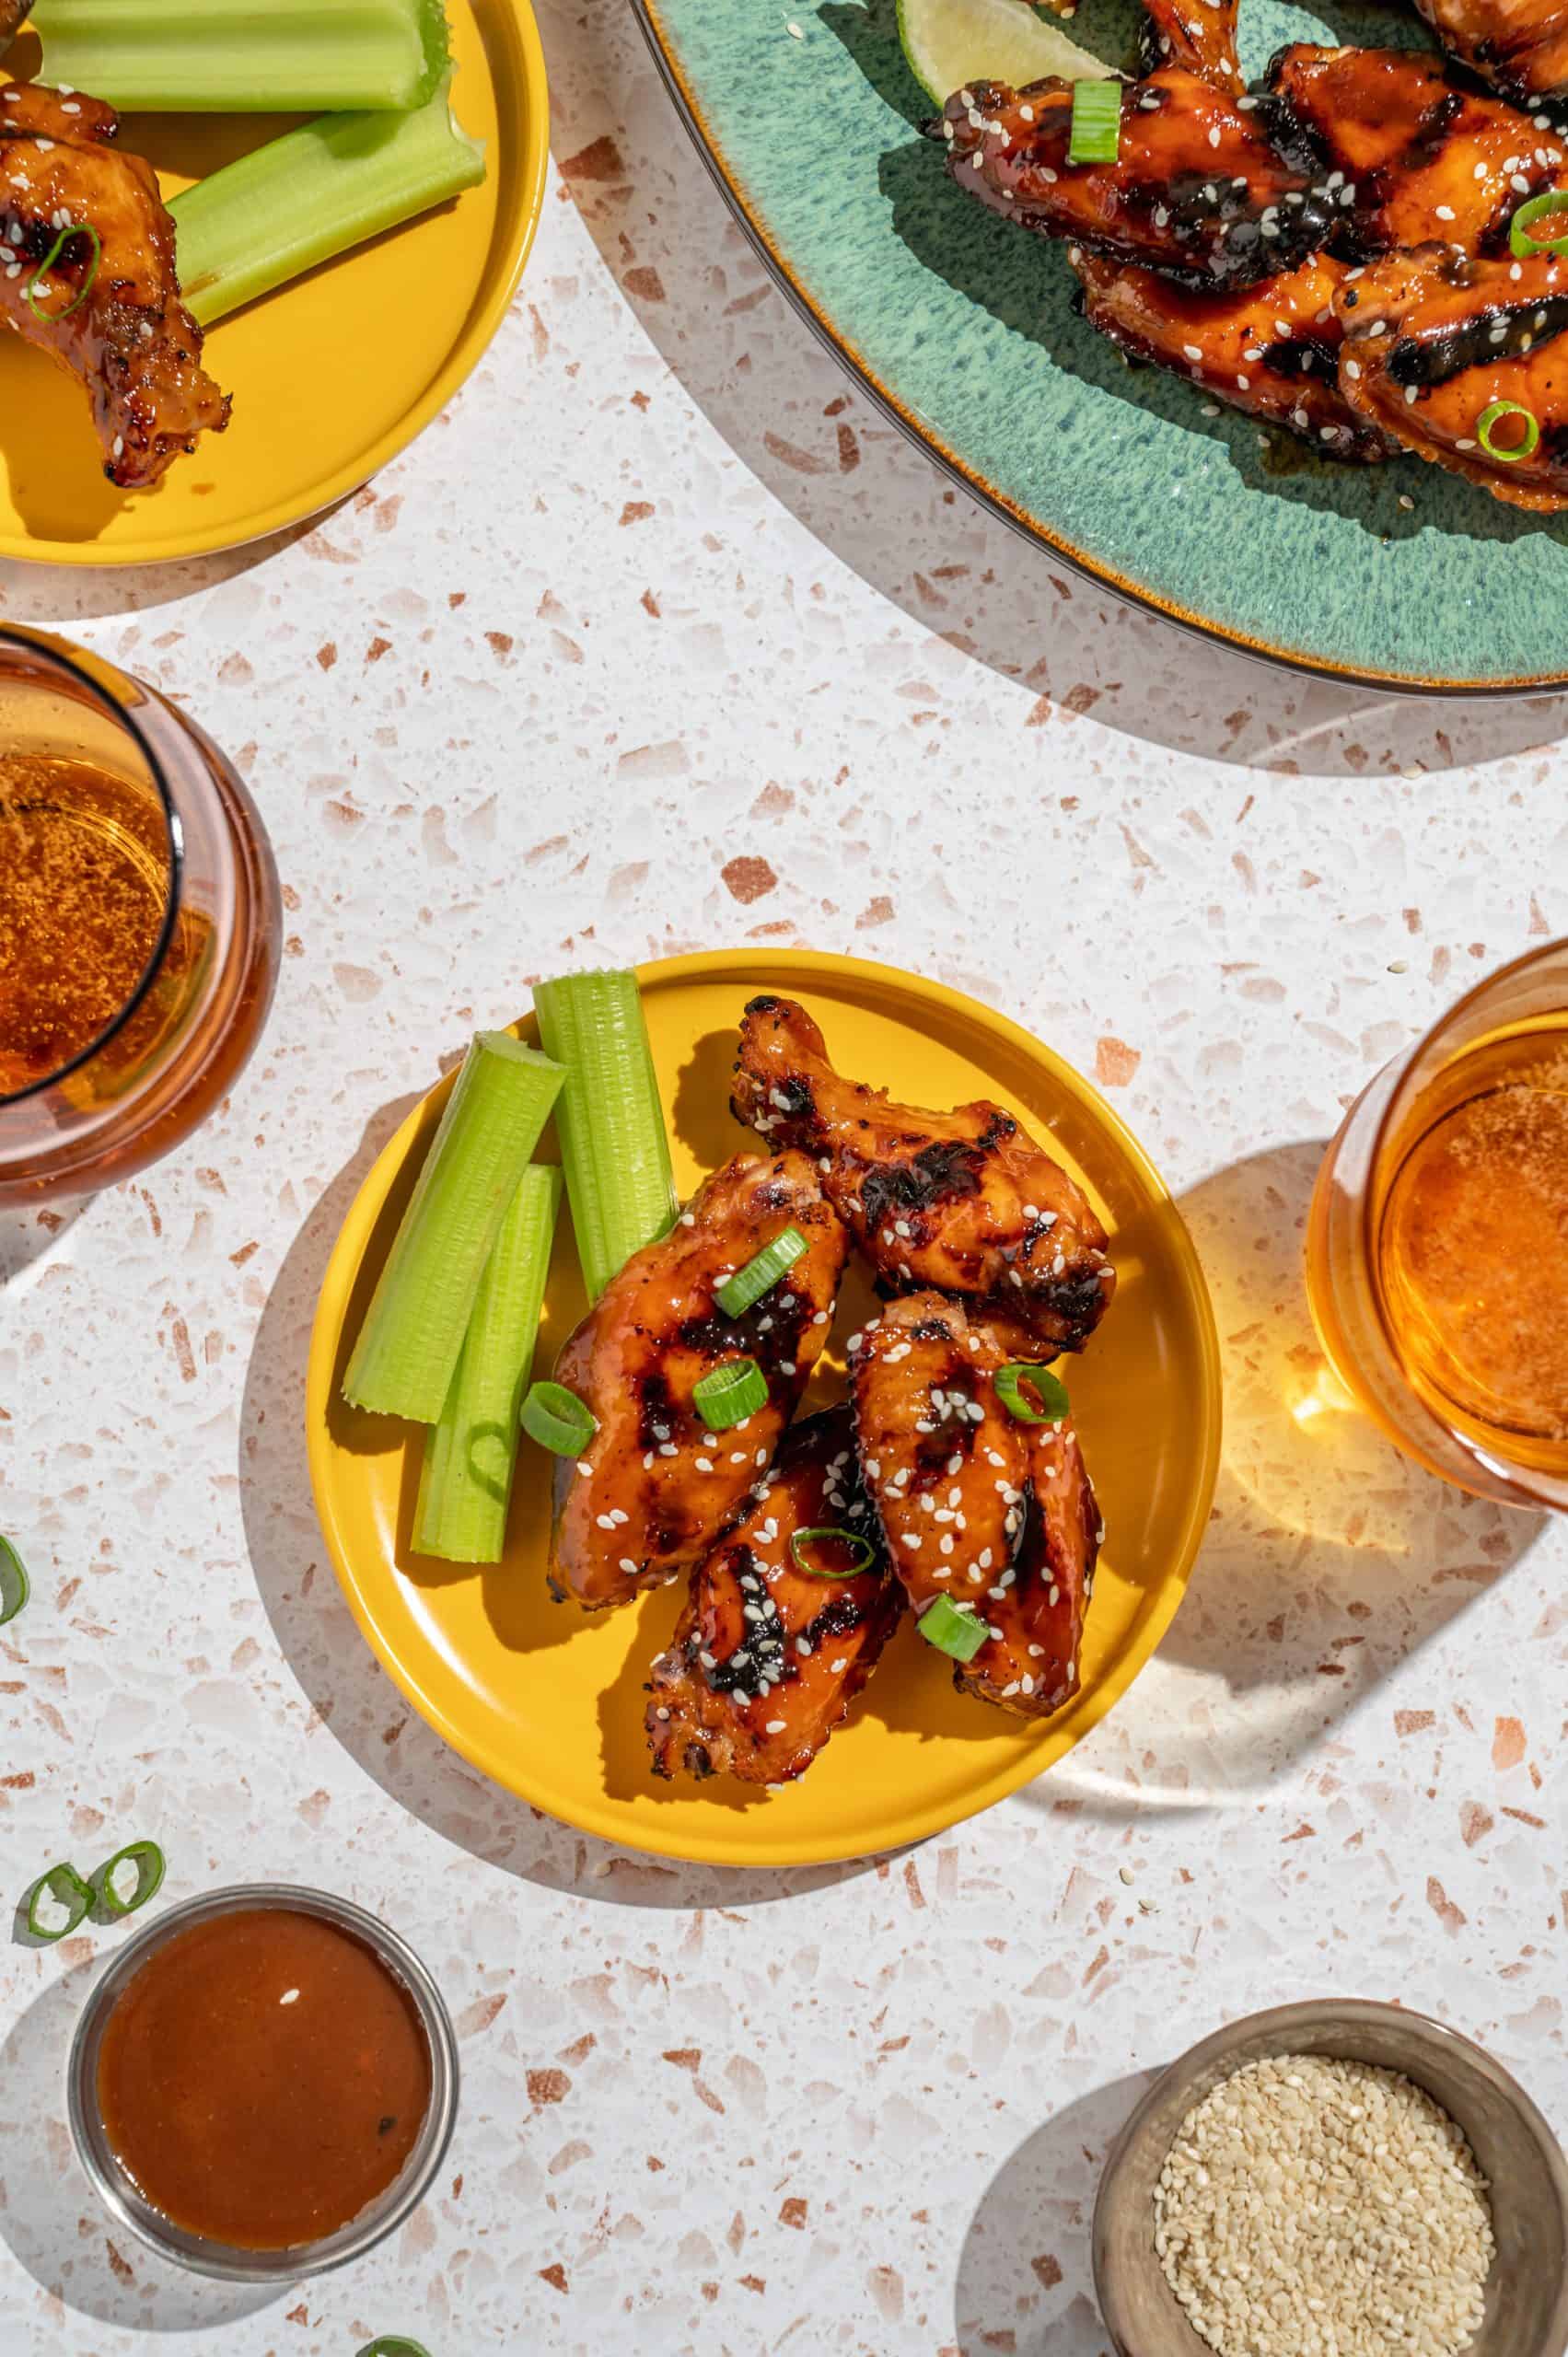 Small plate with 4 Asian grilled chicken wings and celery, glasses of beer, and platter with extra wings on the side